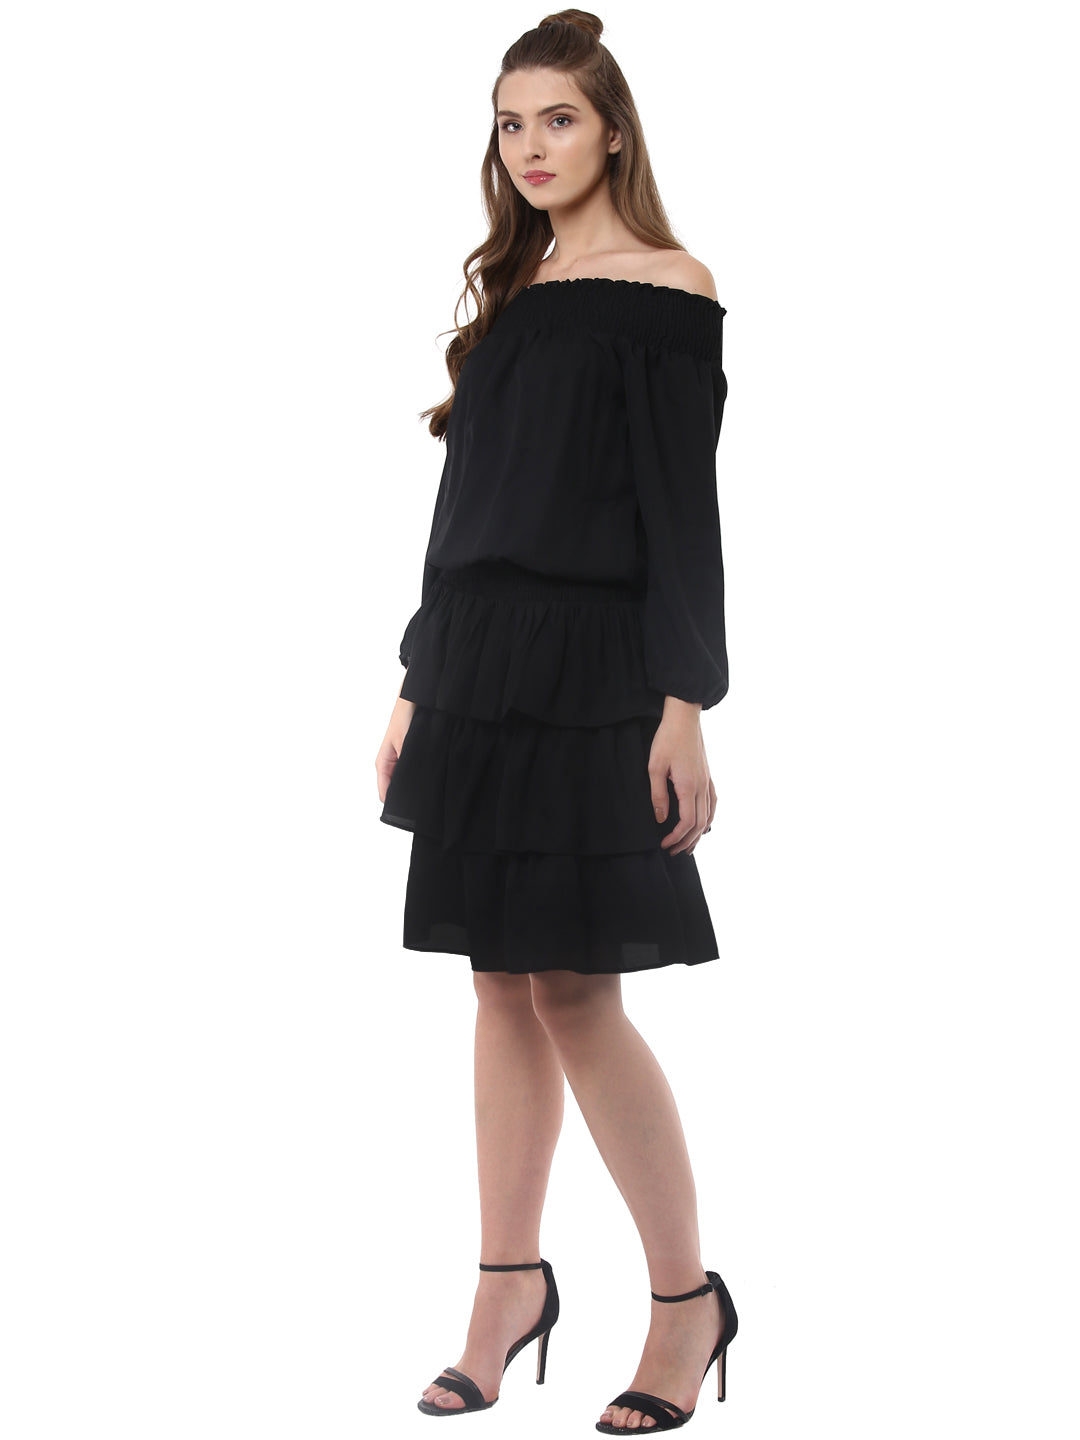 Women's Black Polyester Dress with Multiple Tiers - StyleStone